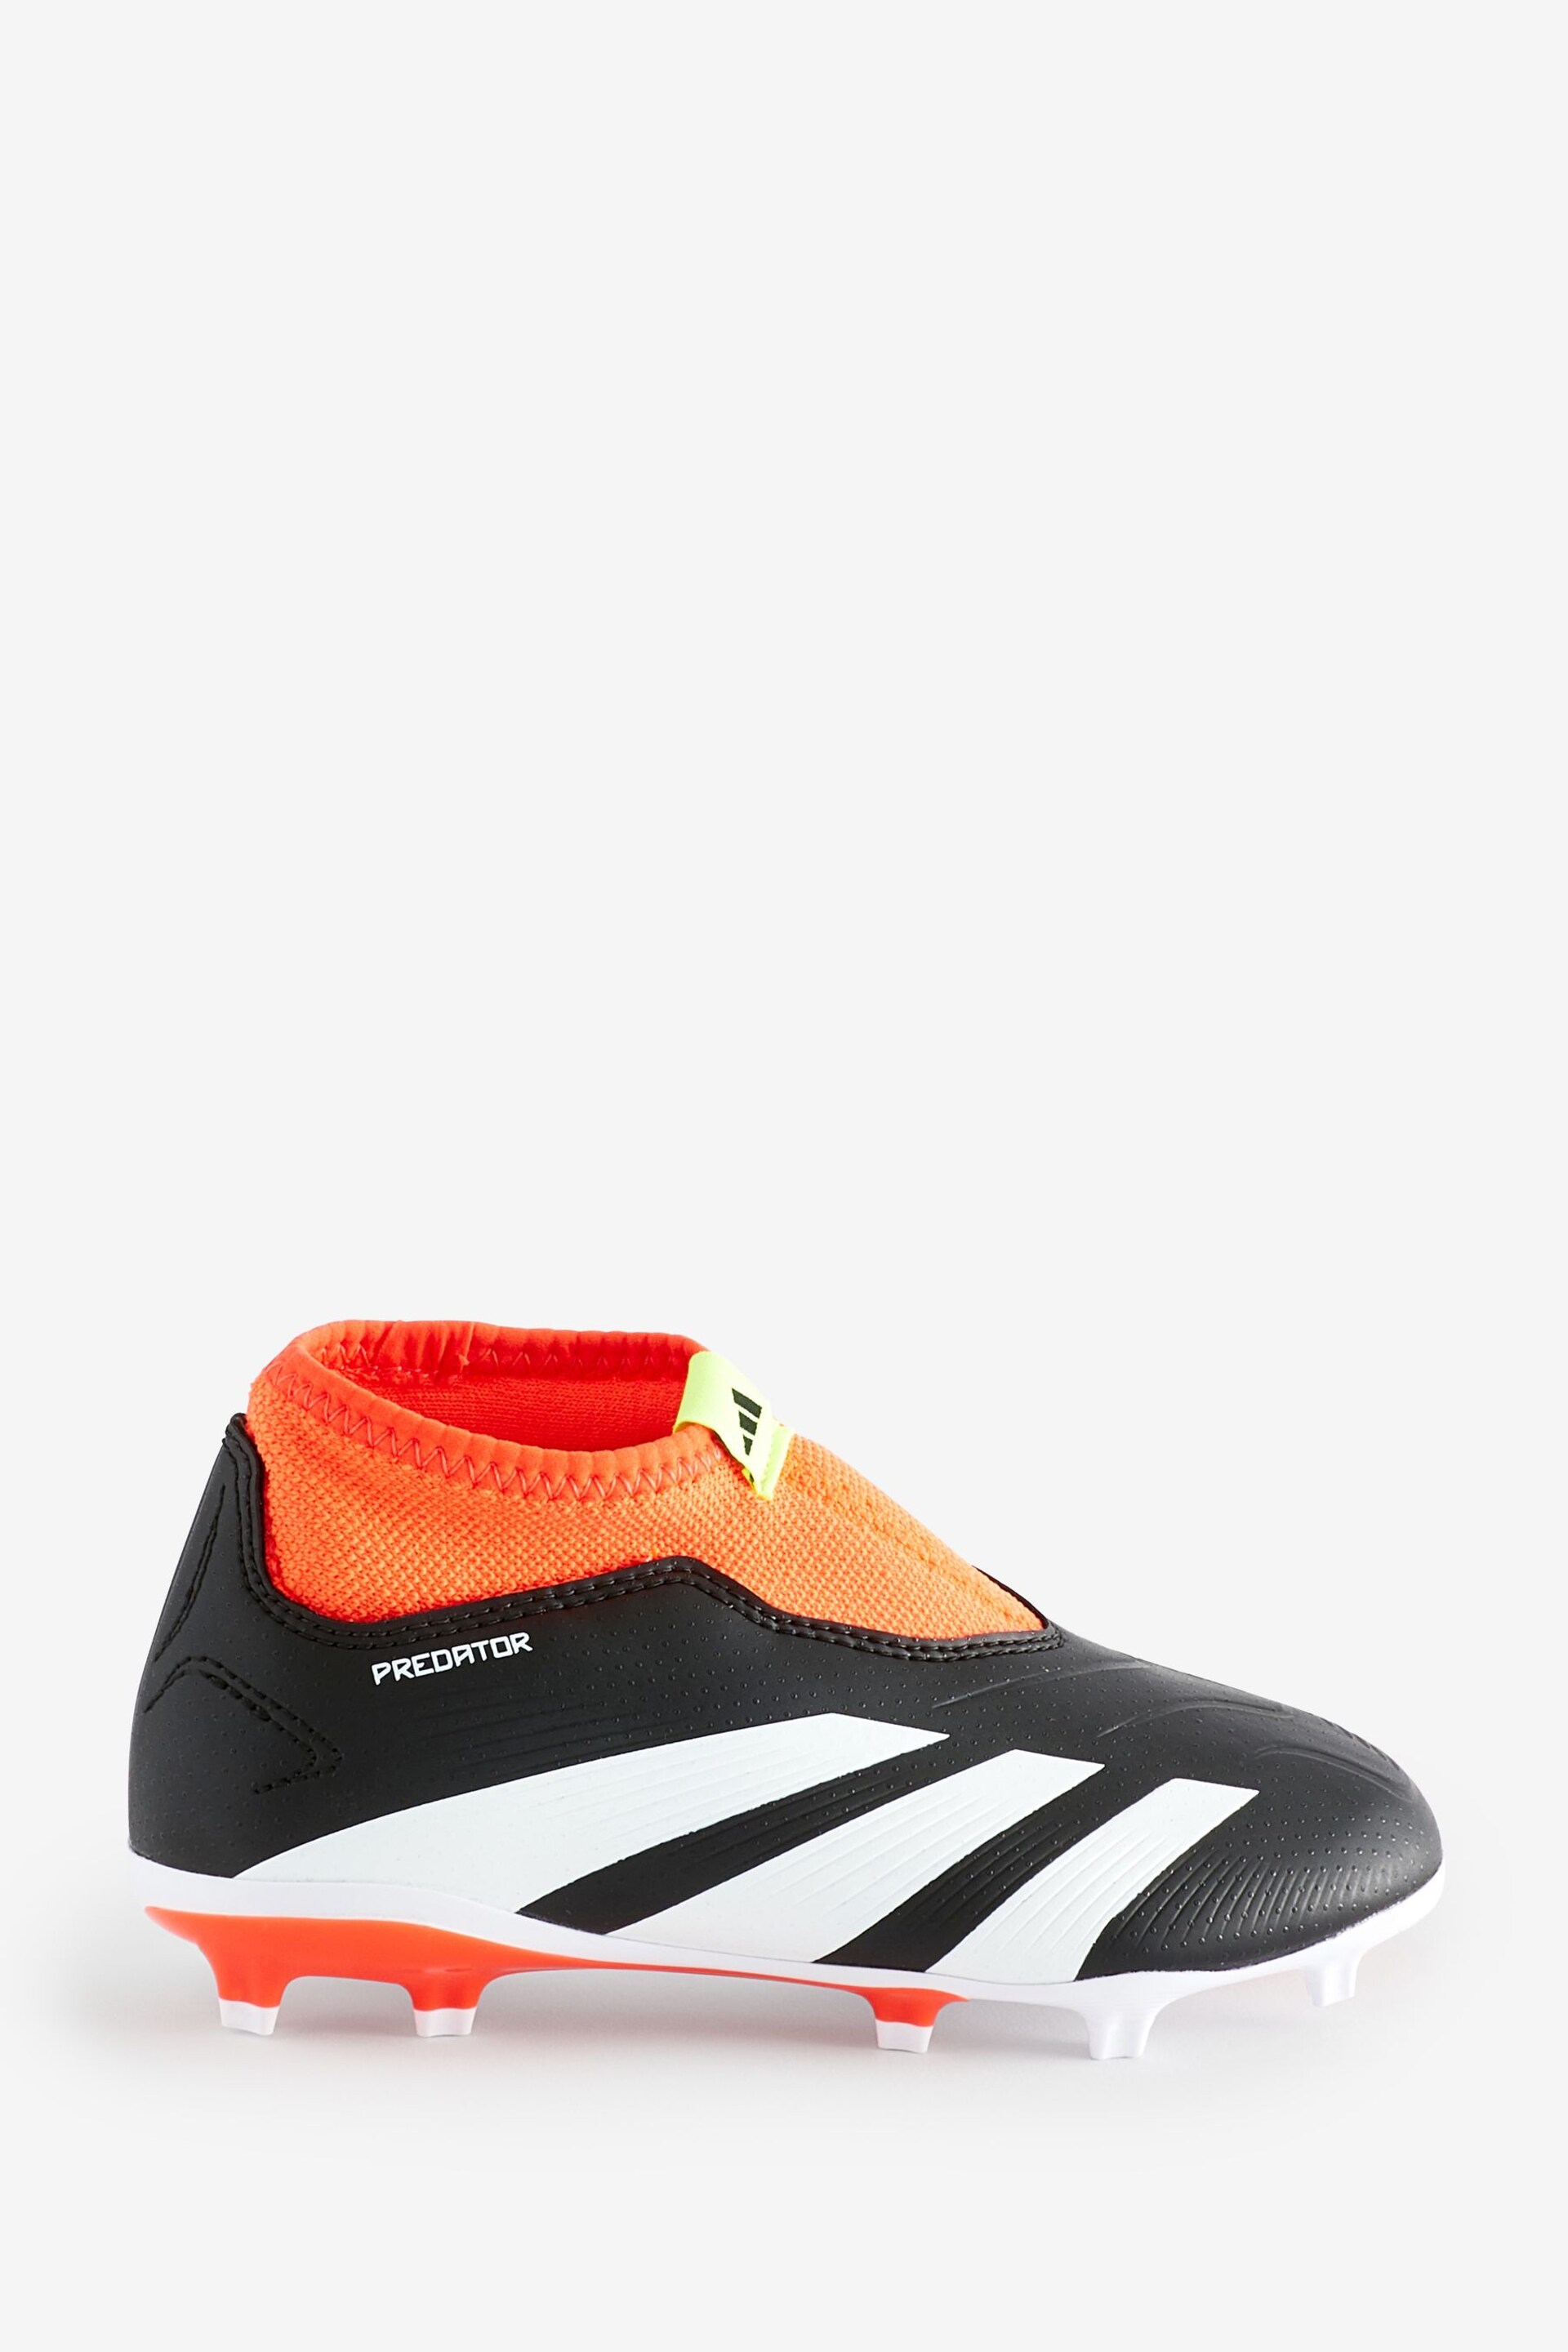 adidas Black Football Predator 24 League Laceless Firm Ground Kids Boots - Image 1 of 9